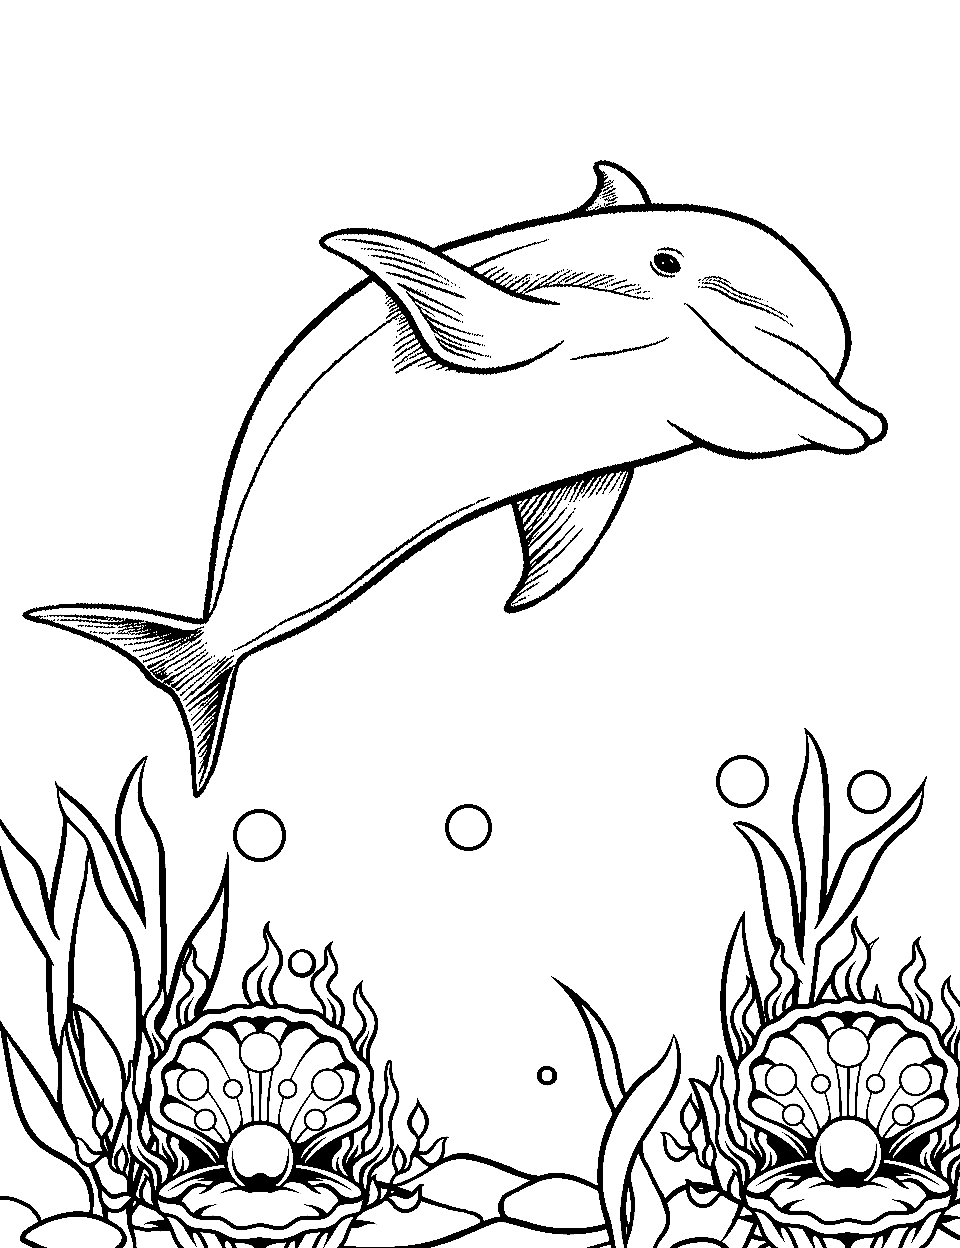 Pearl and Dolphin Coloring Page - A dolphin floating through a sea of pearls.